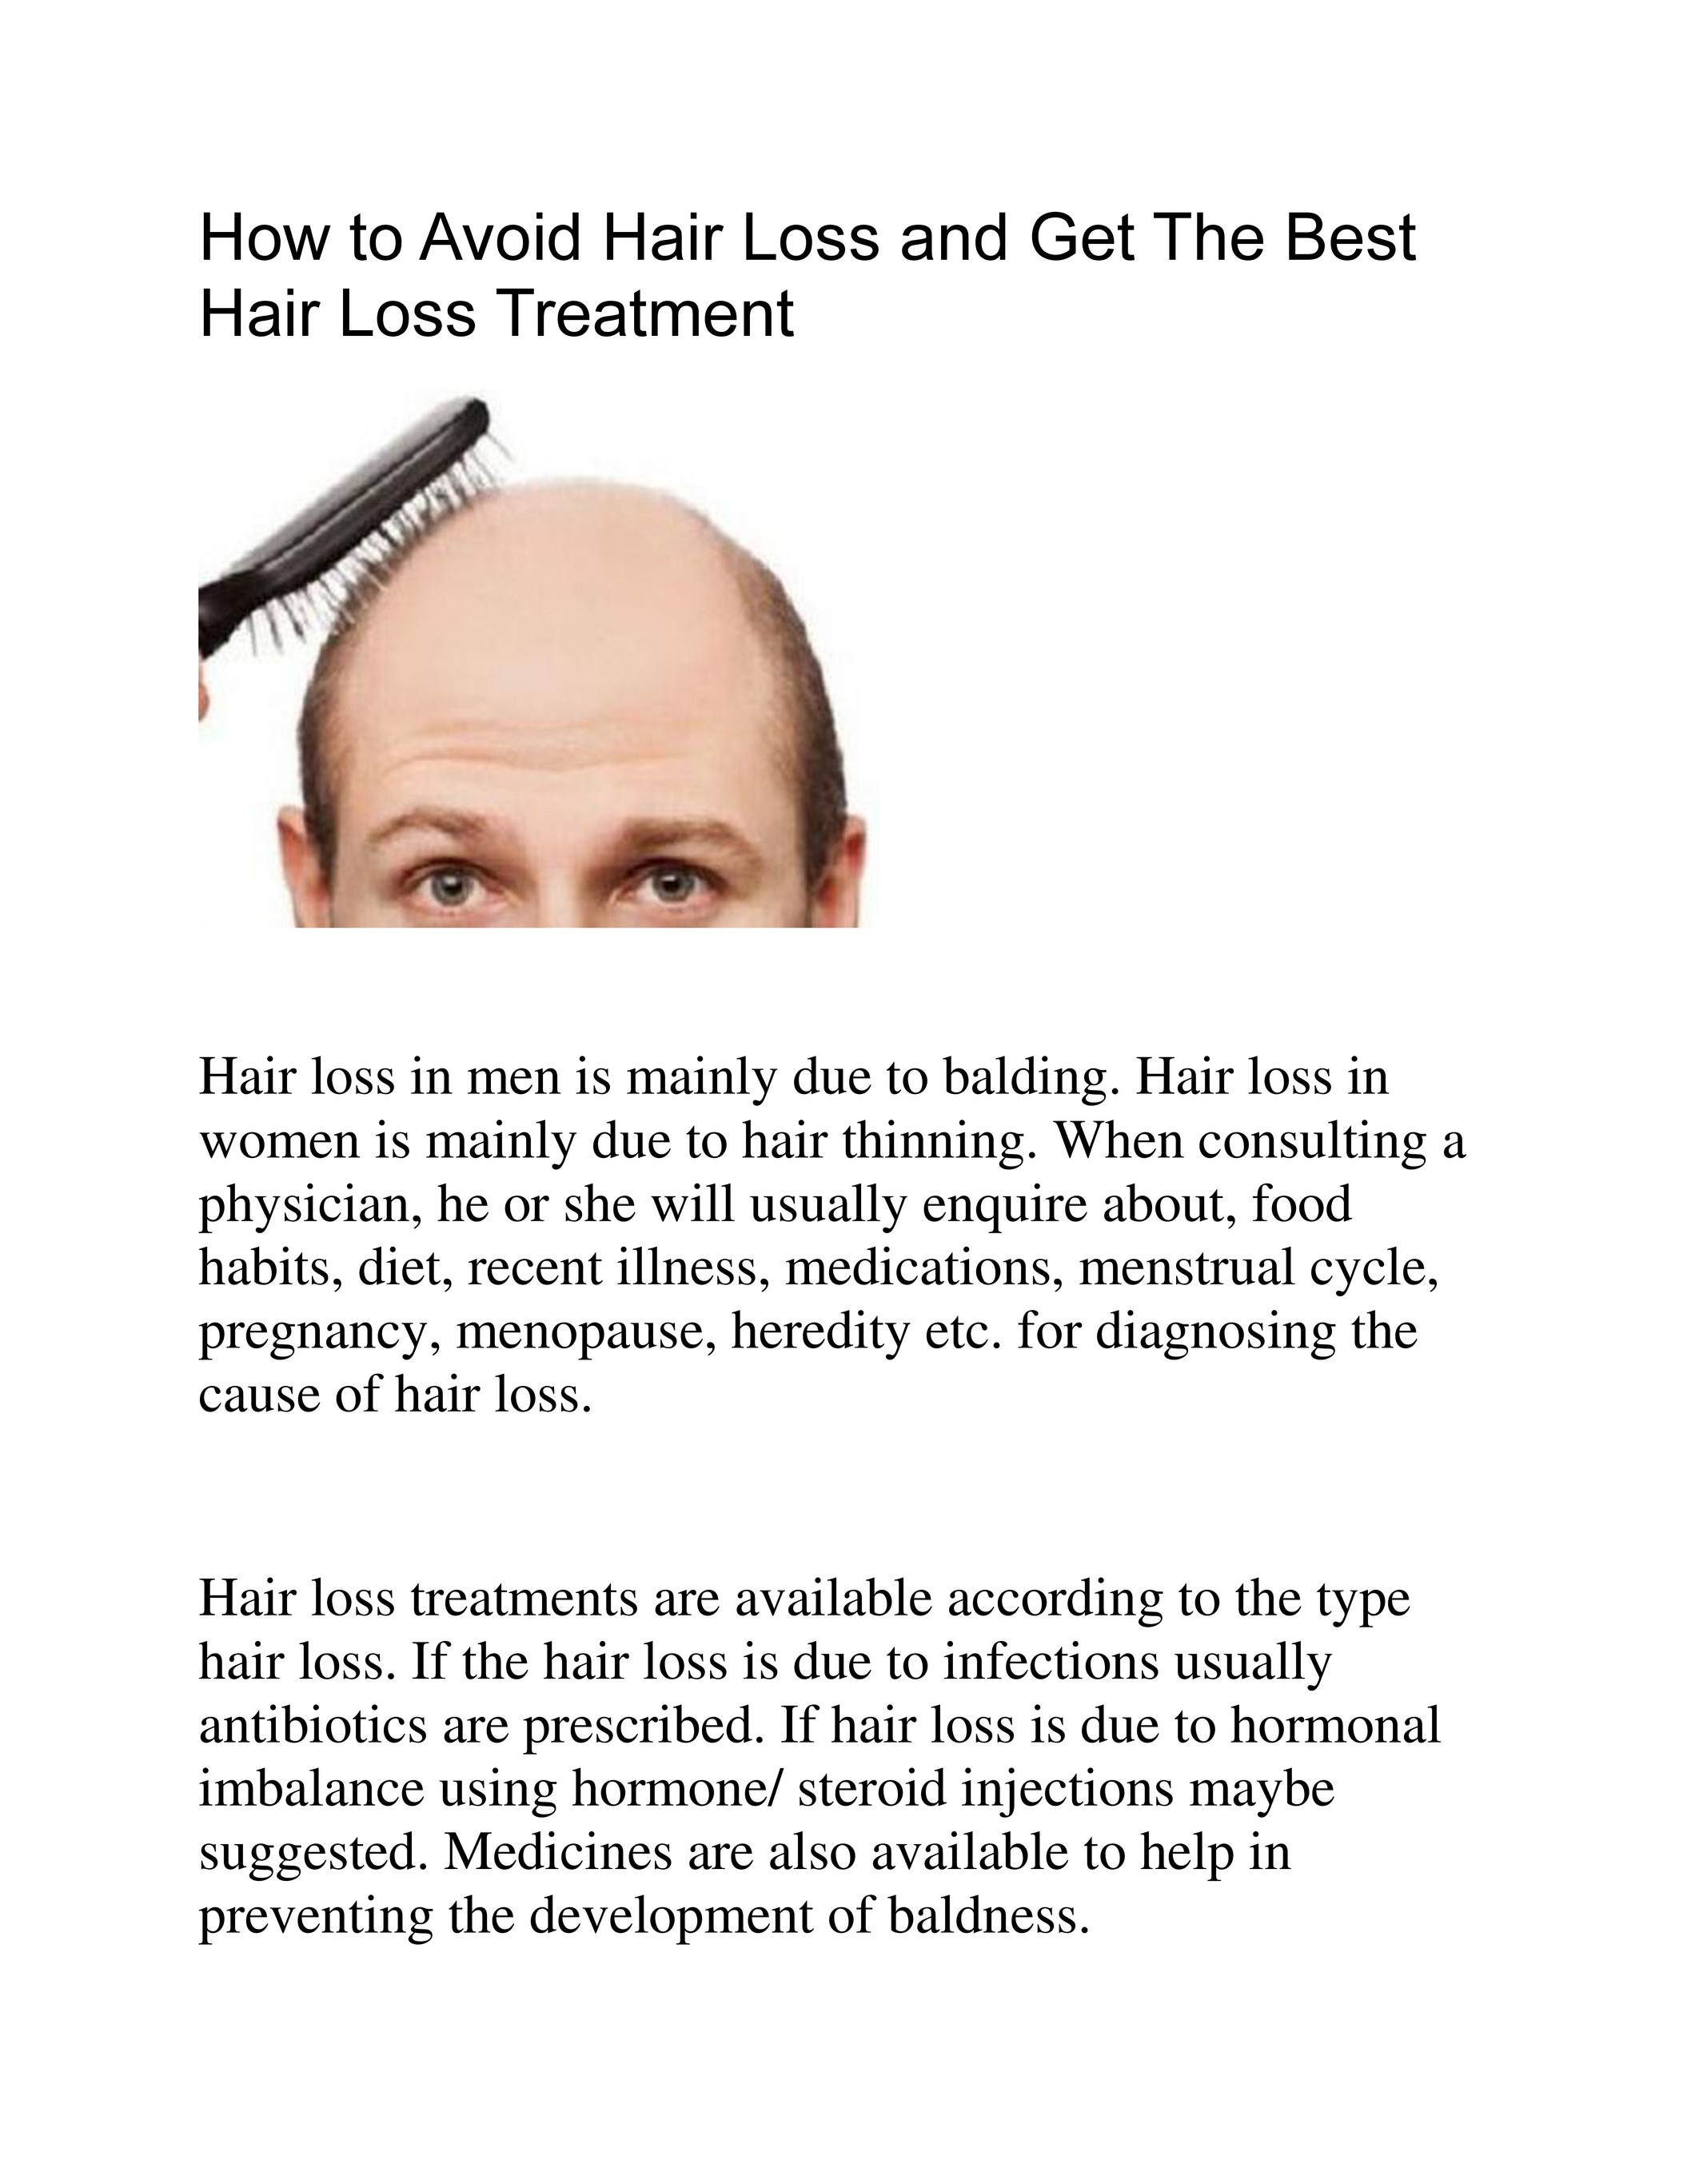 bestnaturalhairlos - How To Avoid Hair Loss and Get The best Hair Loss  Treatment - Page 1 - Created with 